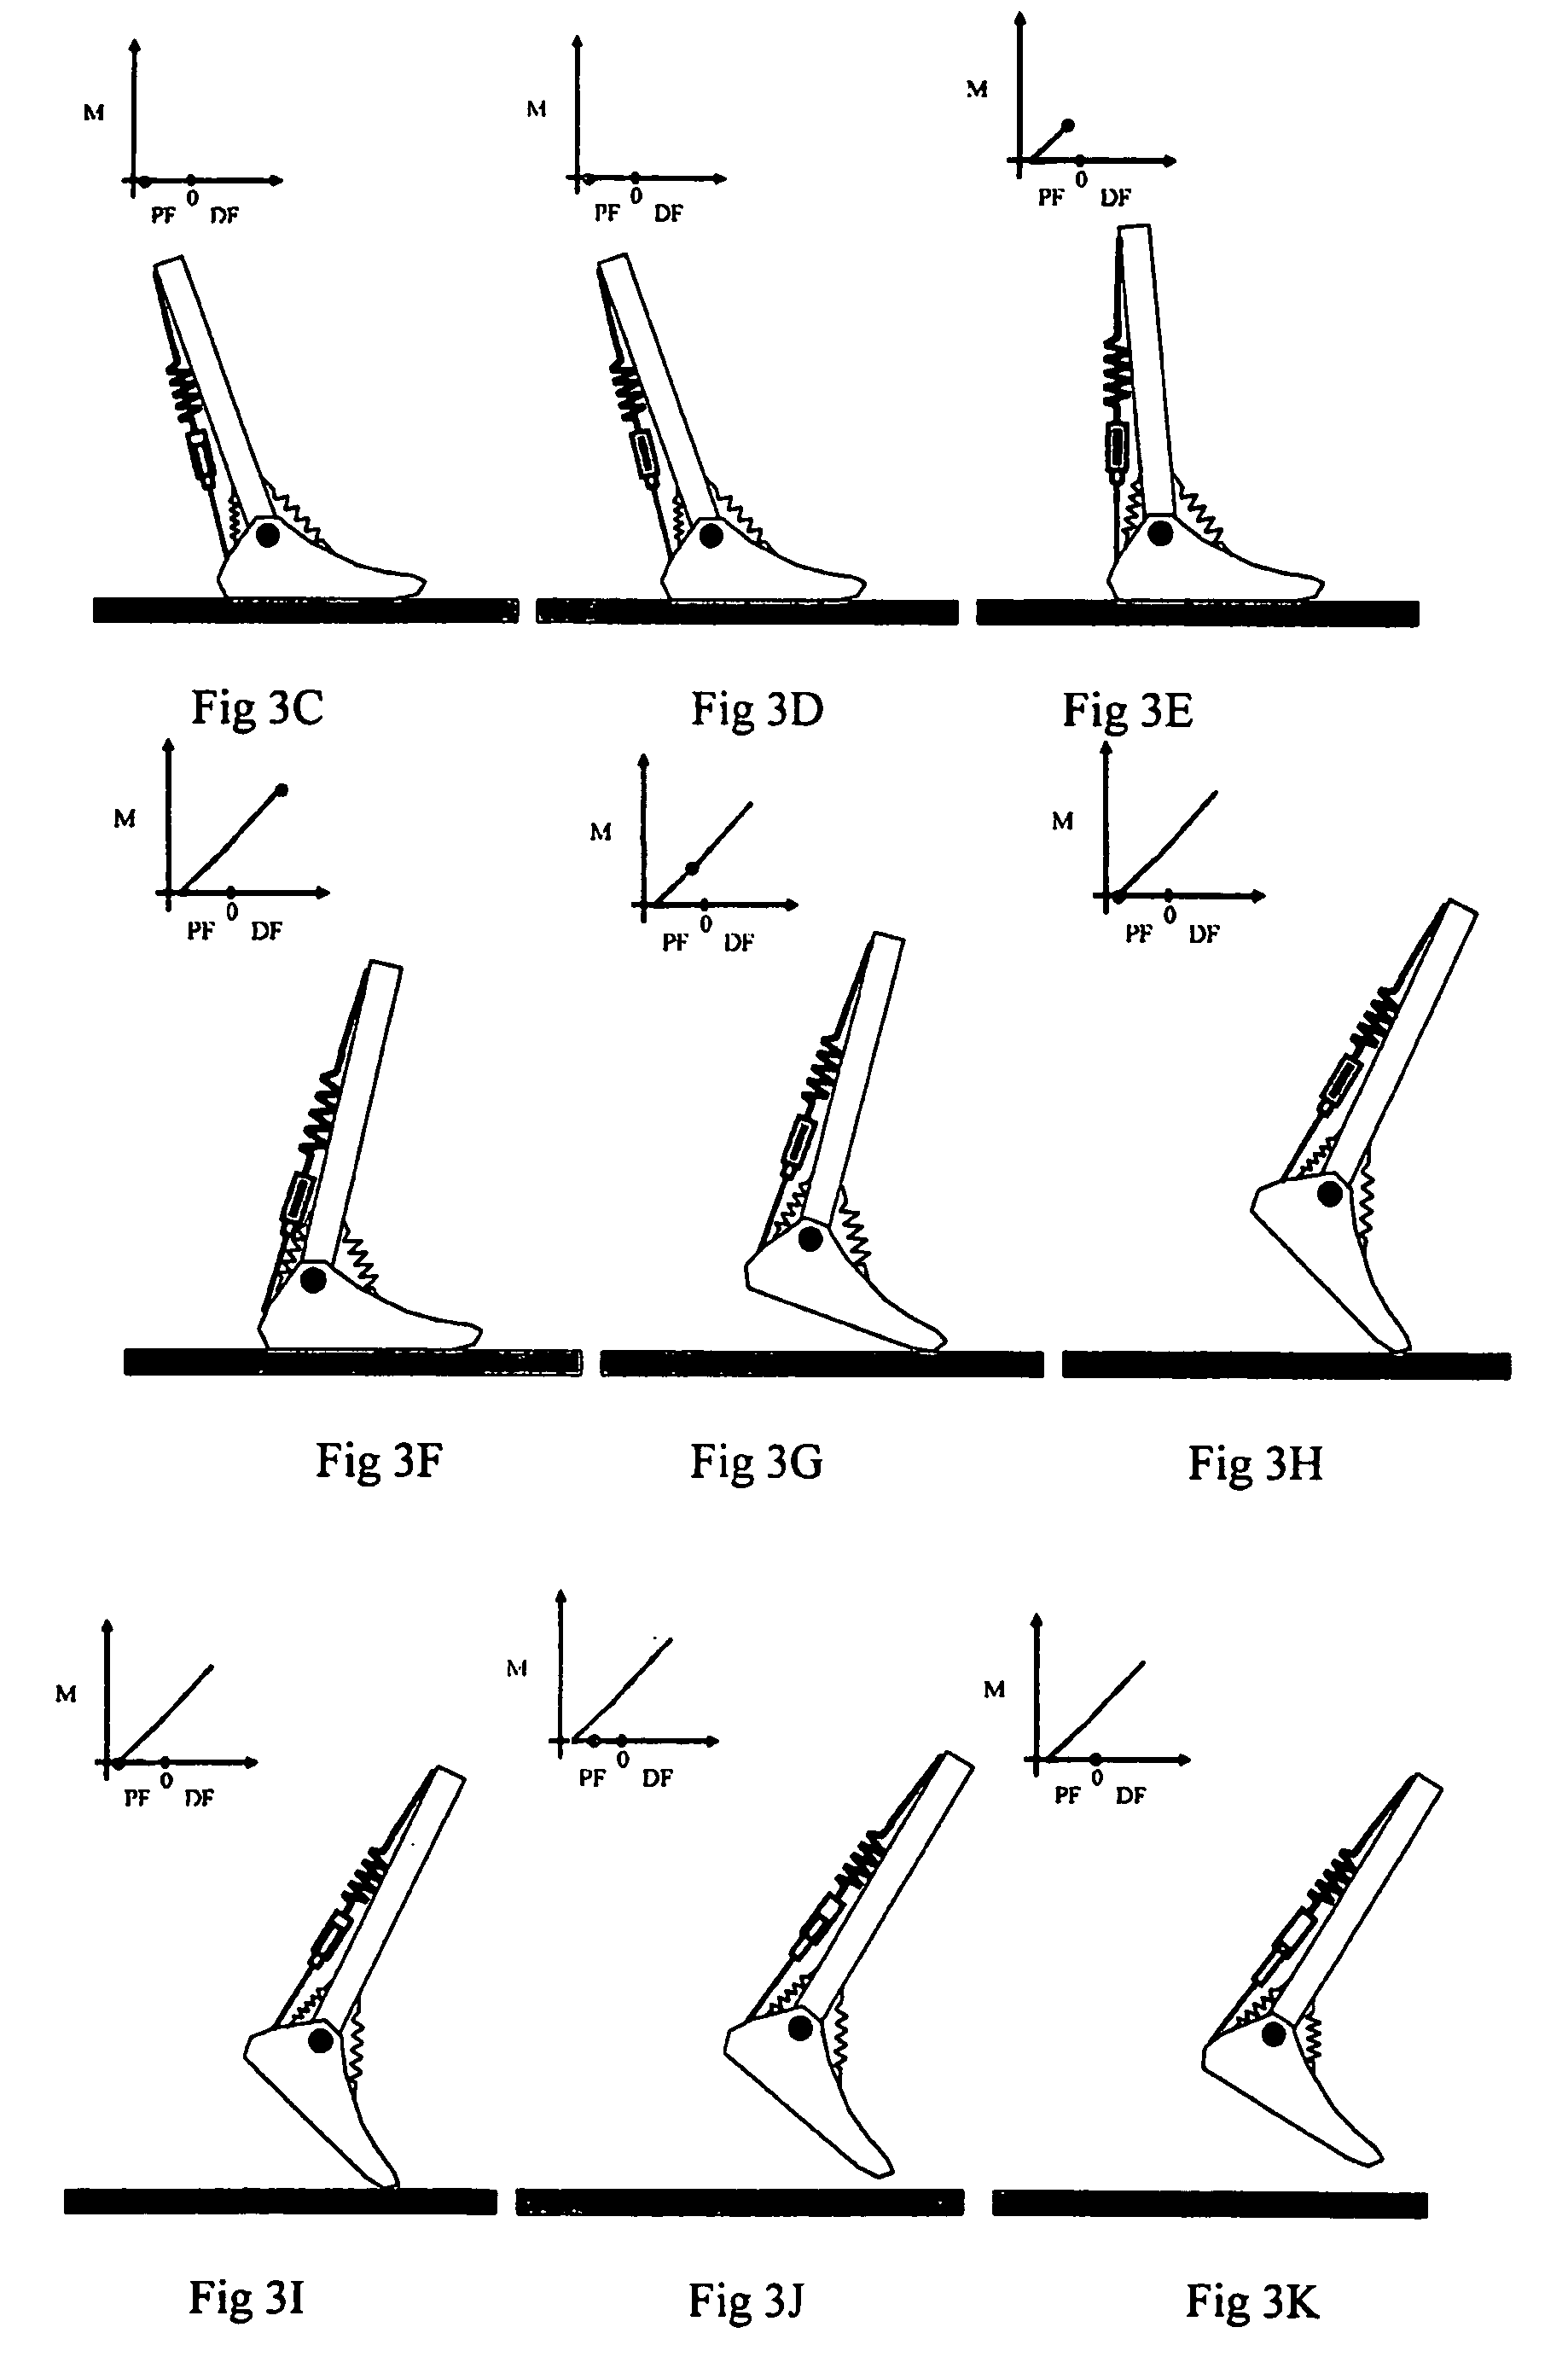 Equilibrium-point prosthetic and orthotic ankle-foot systems and devices